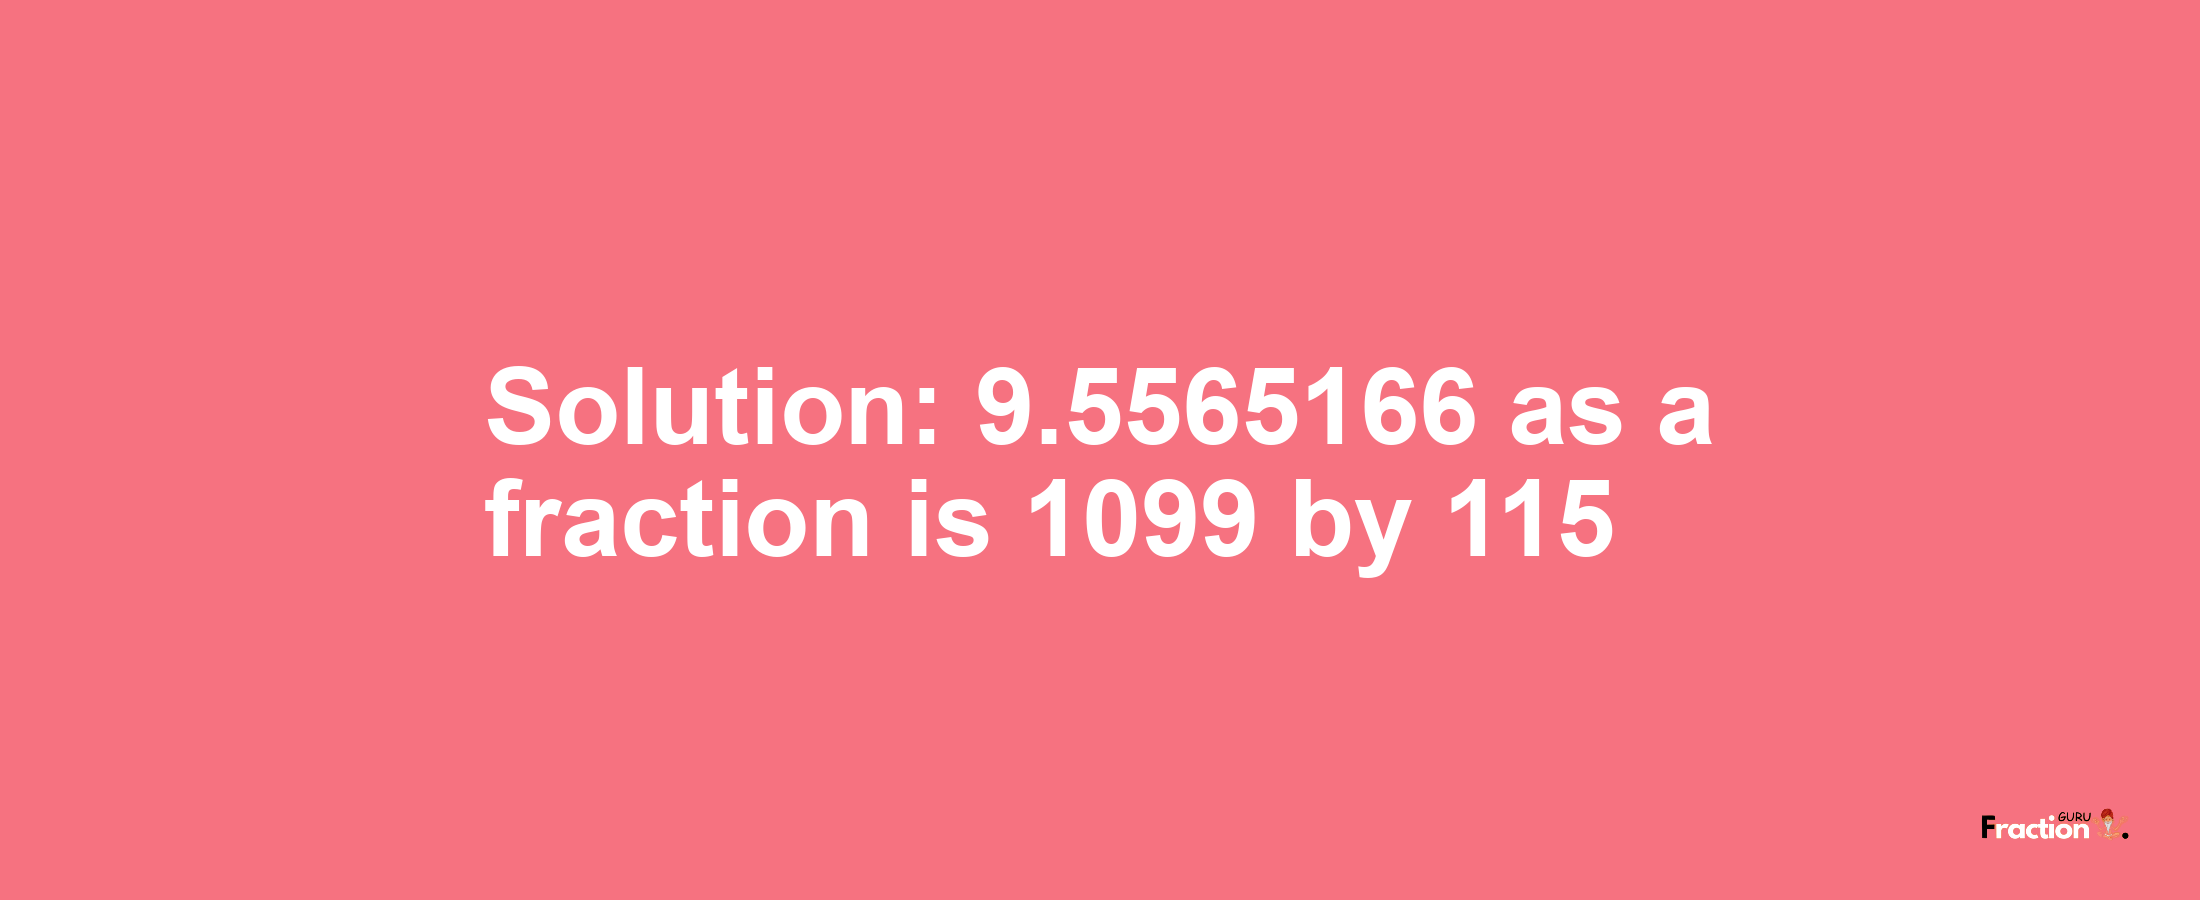 Solution:9.5565166 as a fraction is 1099/115